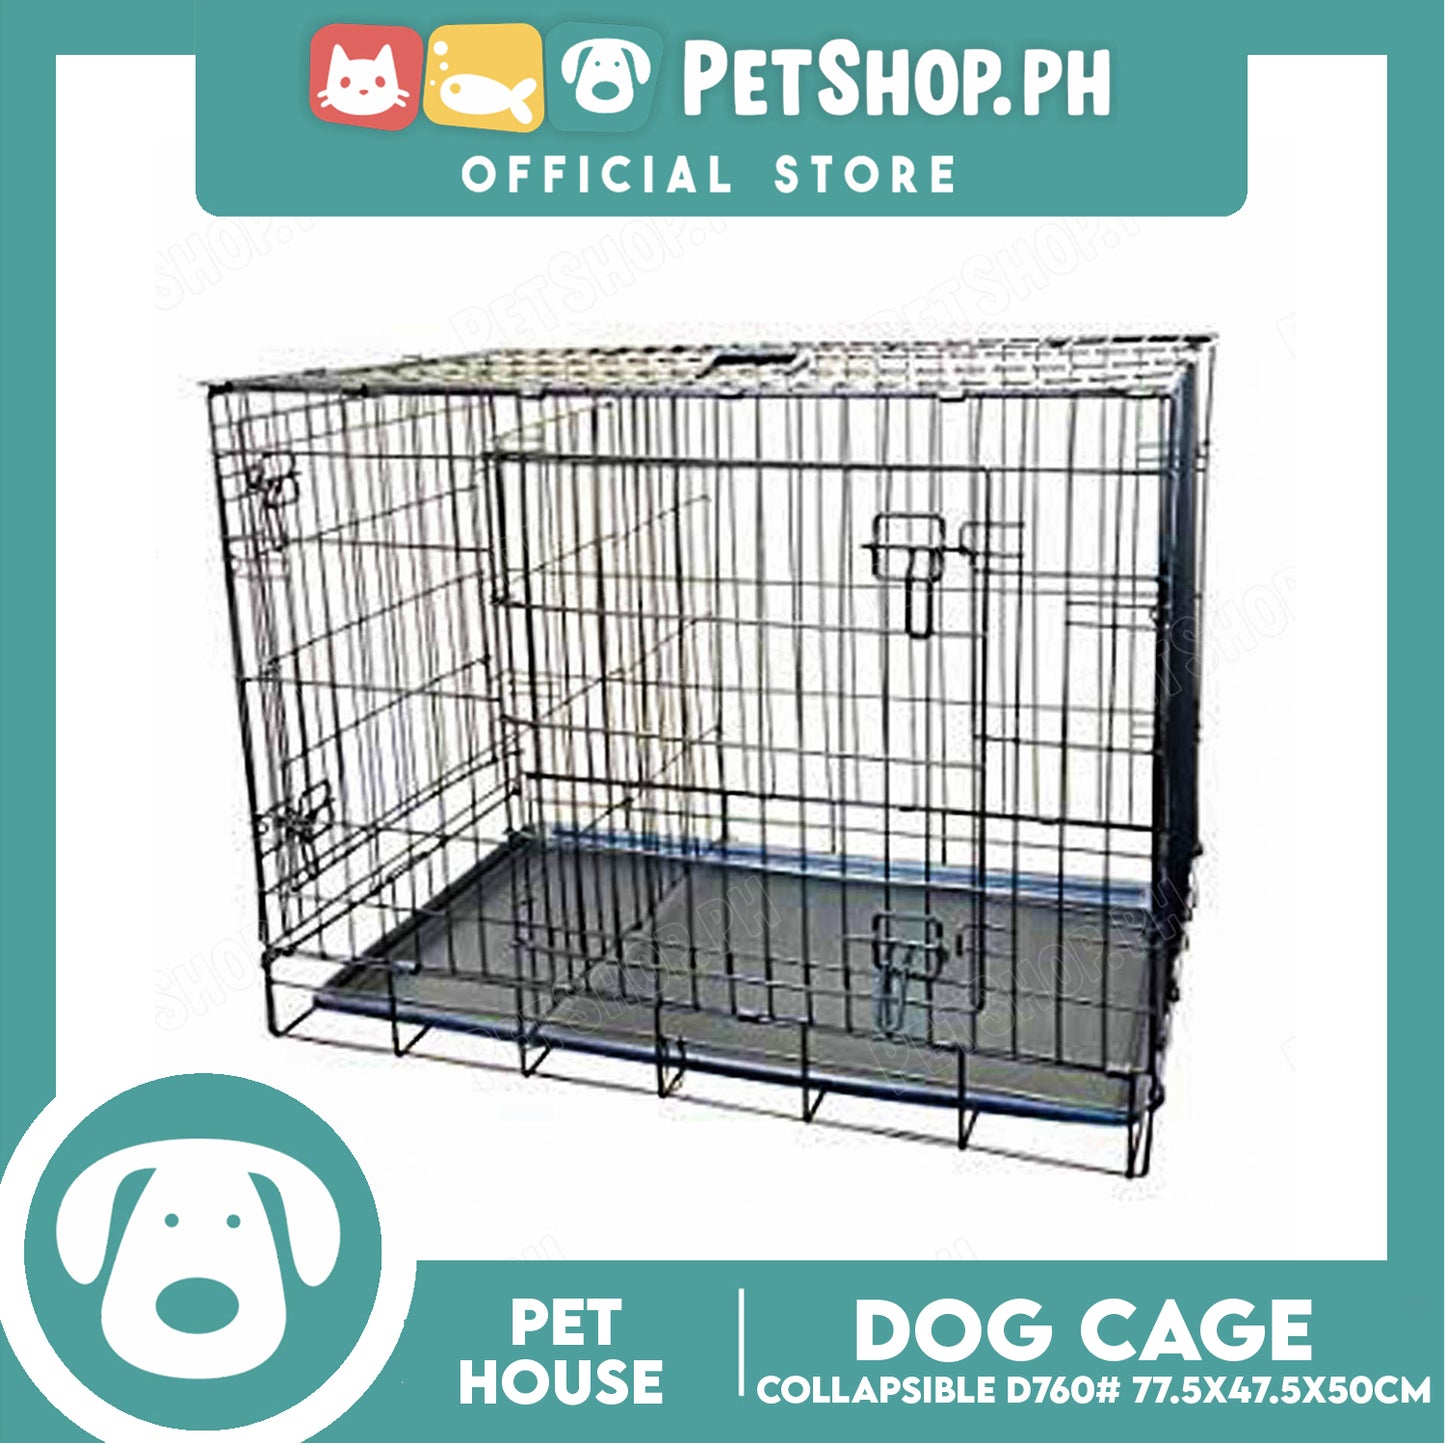 D760# Collapsible Dog Cage 77.5x47.5x50